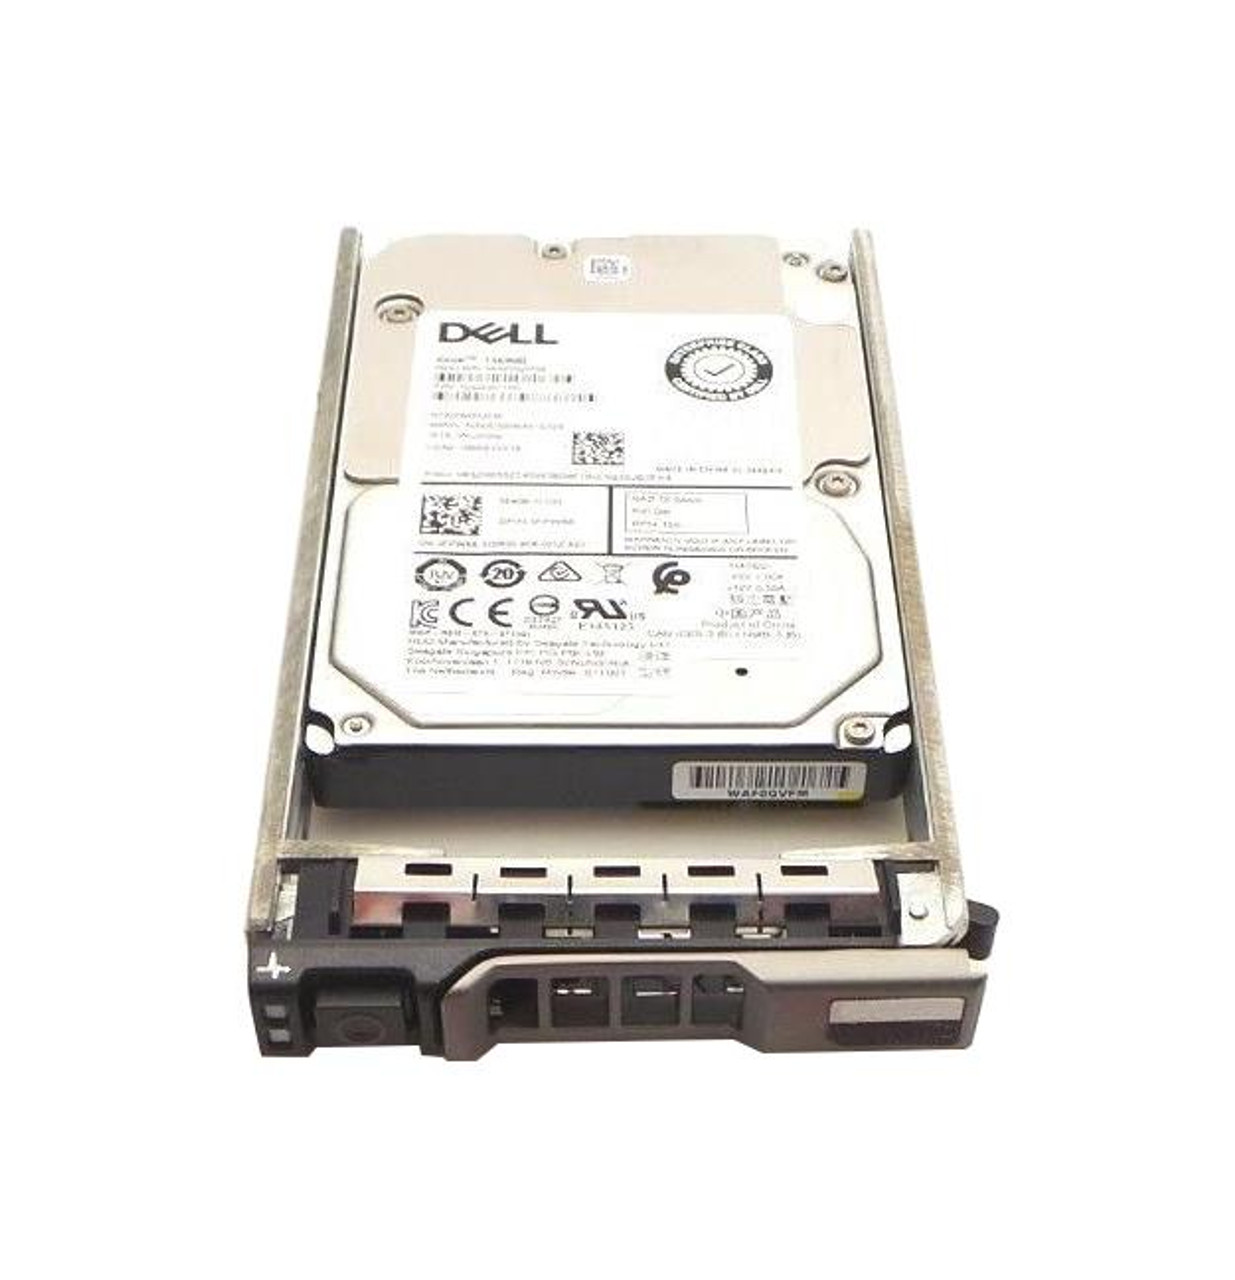 400-AUYY Dell 2TB 7200RPM SATA 6Gbps Hot Swap (512n) 2.5-inch Internal Hard Drive with Tray